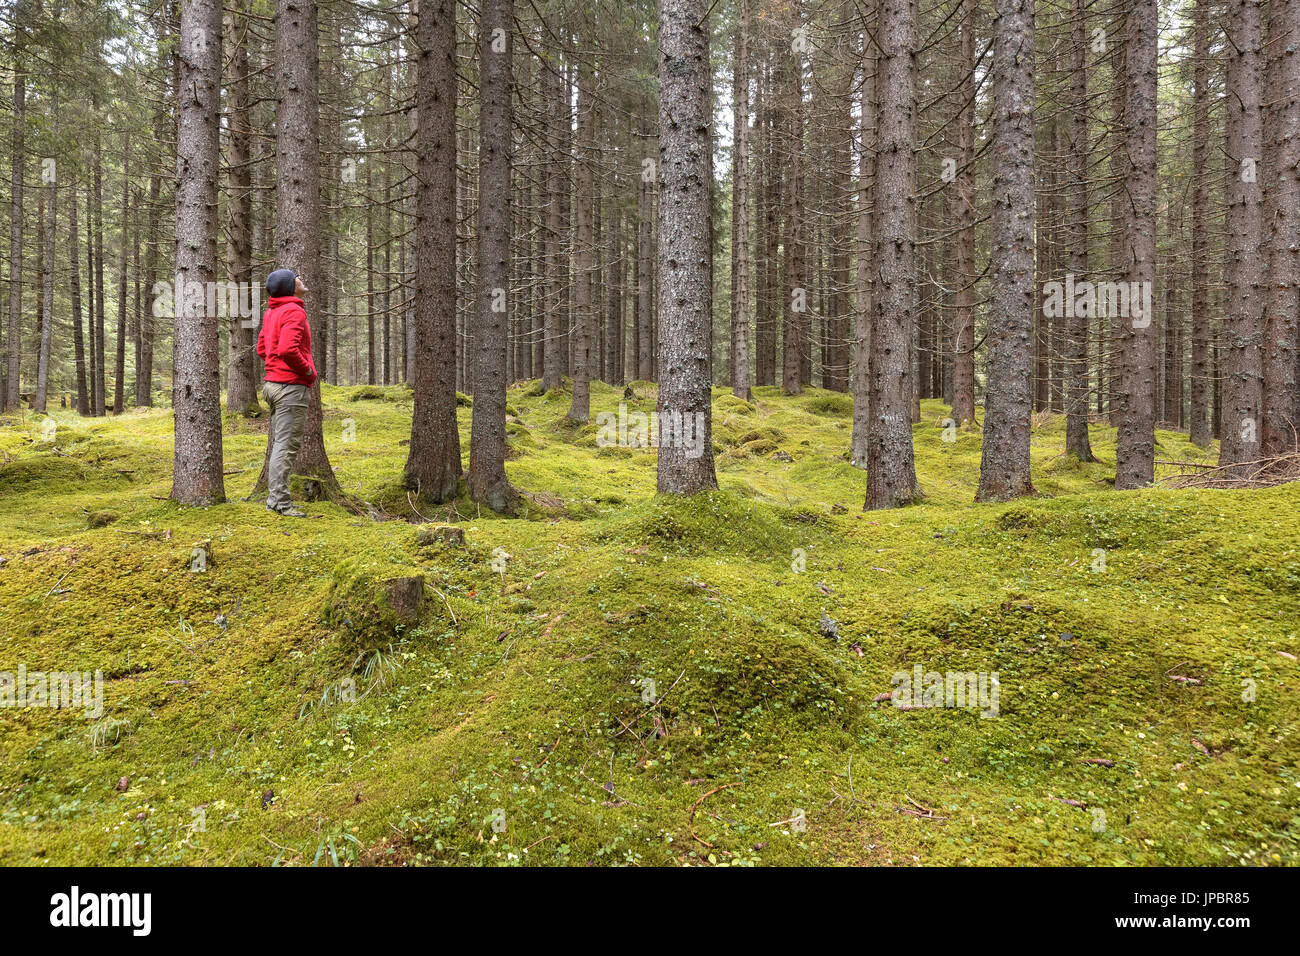 Europe, Italy, Trentino, Predazzo. Man looking the fir trees in the forest of paneveggio, Dolomites Stock Photo